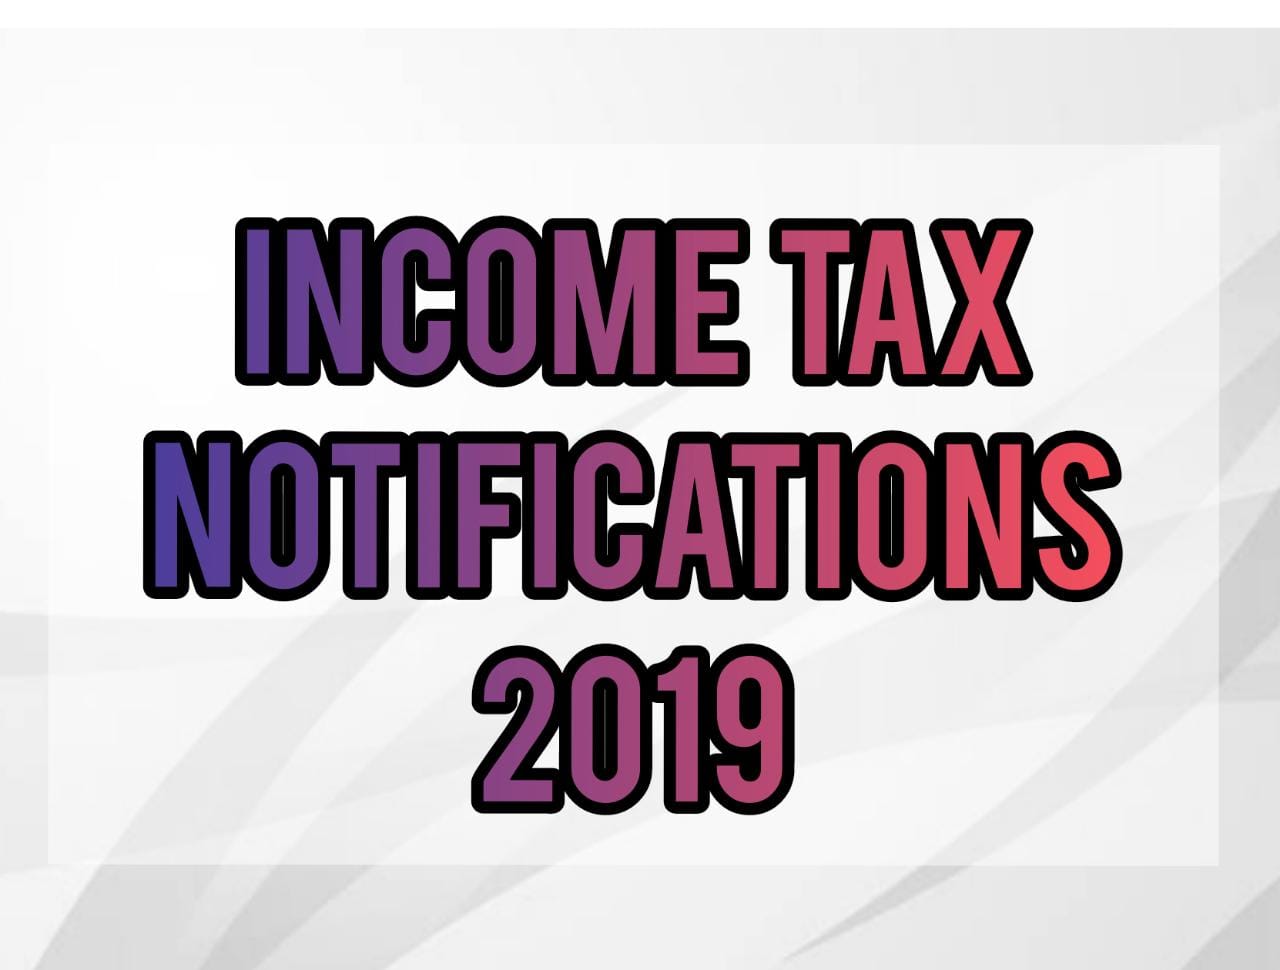 Income Tax notification for 2019